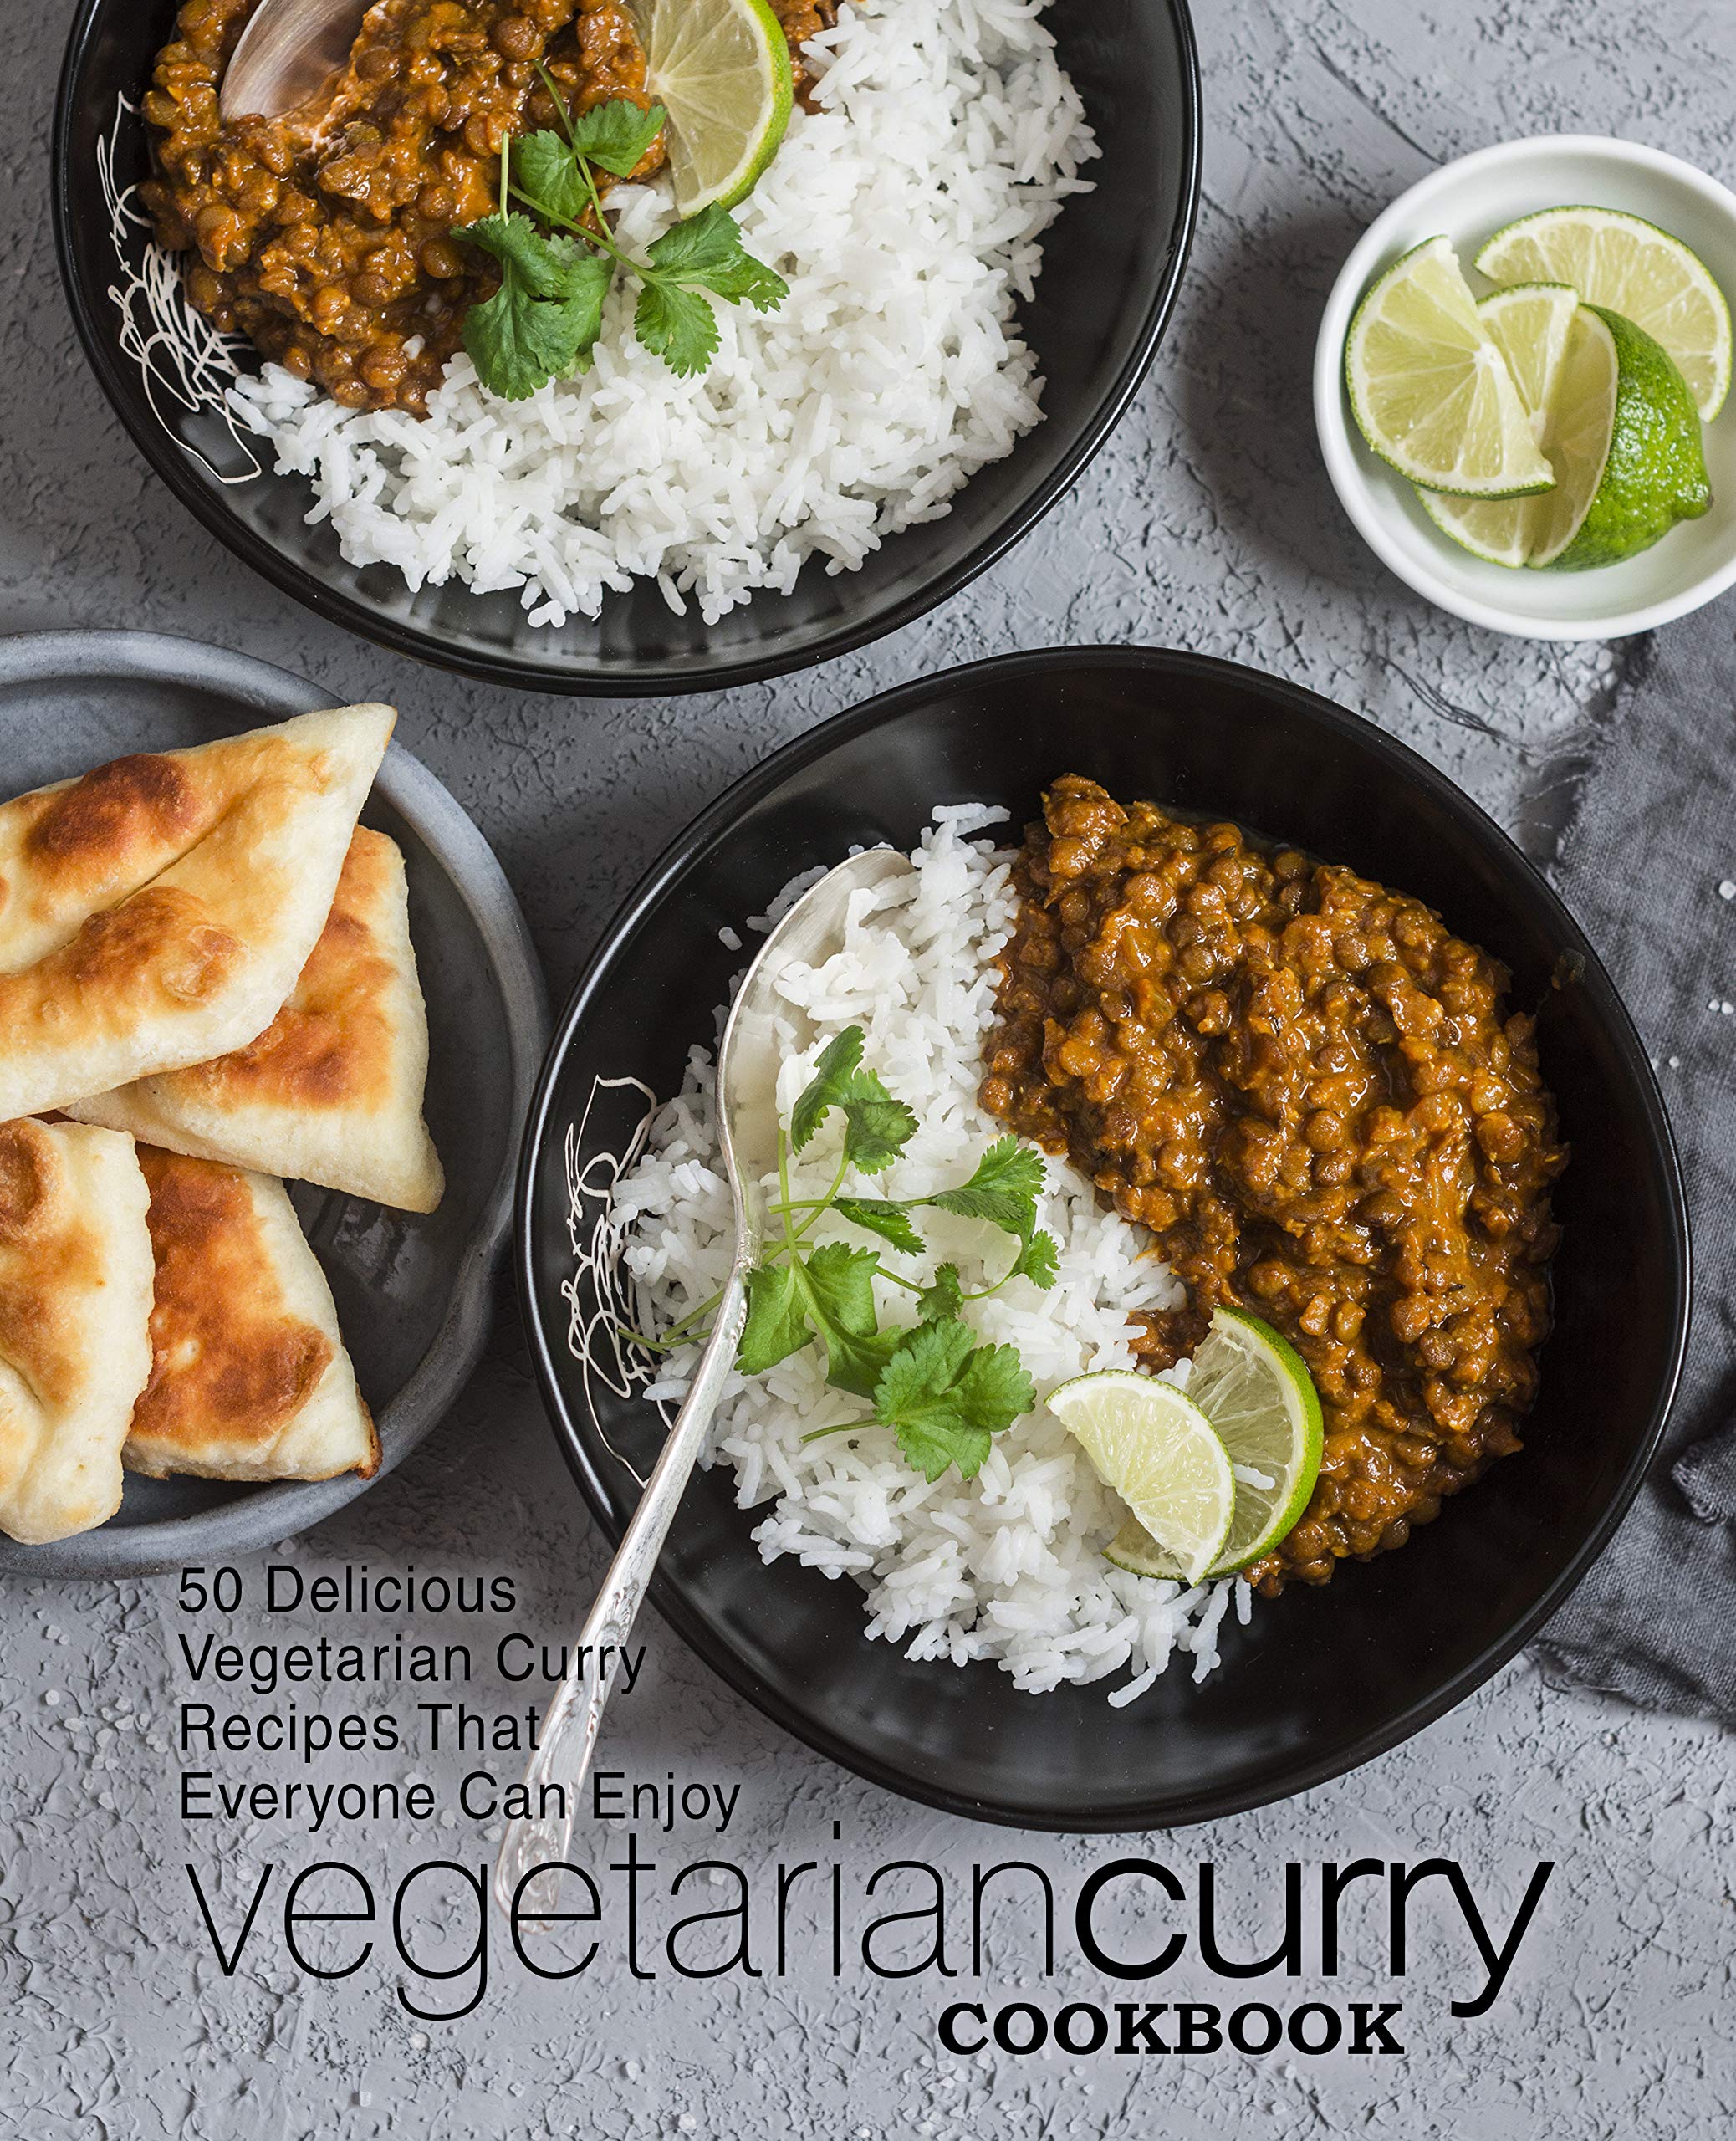 Vegetarian Curry Cookbook: 50 Delicious Vegetarian Curry Recipes That Everyone Can Enjoy (2nd Edition)